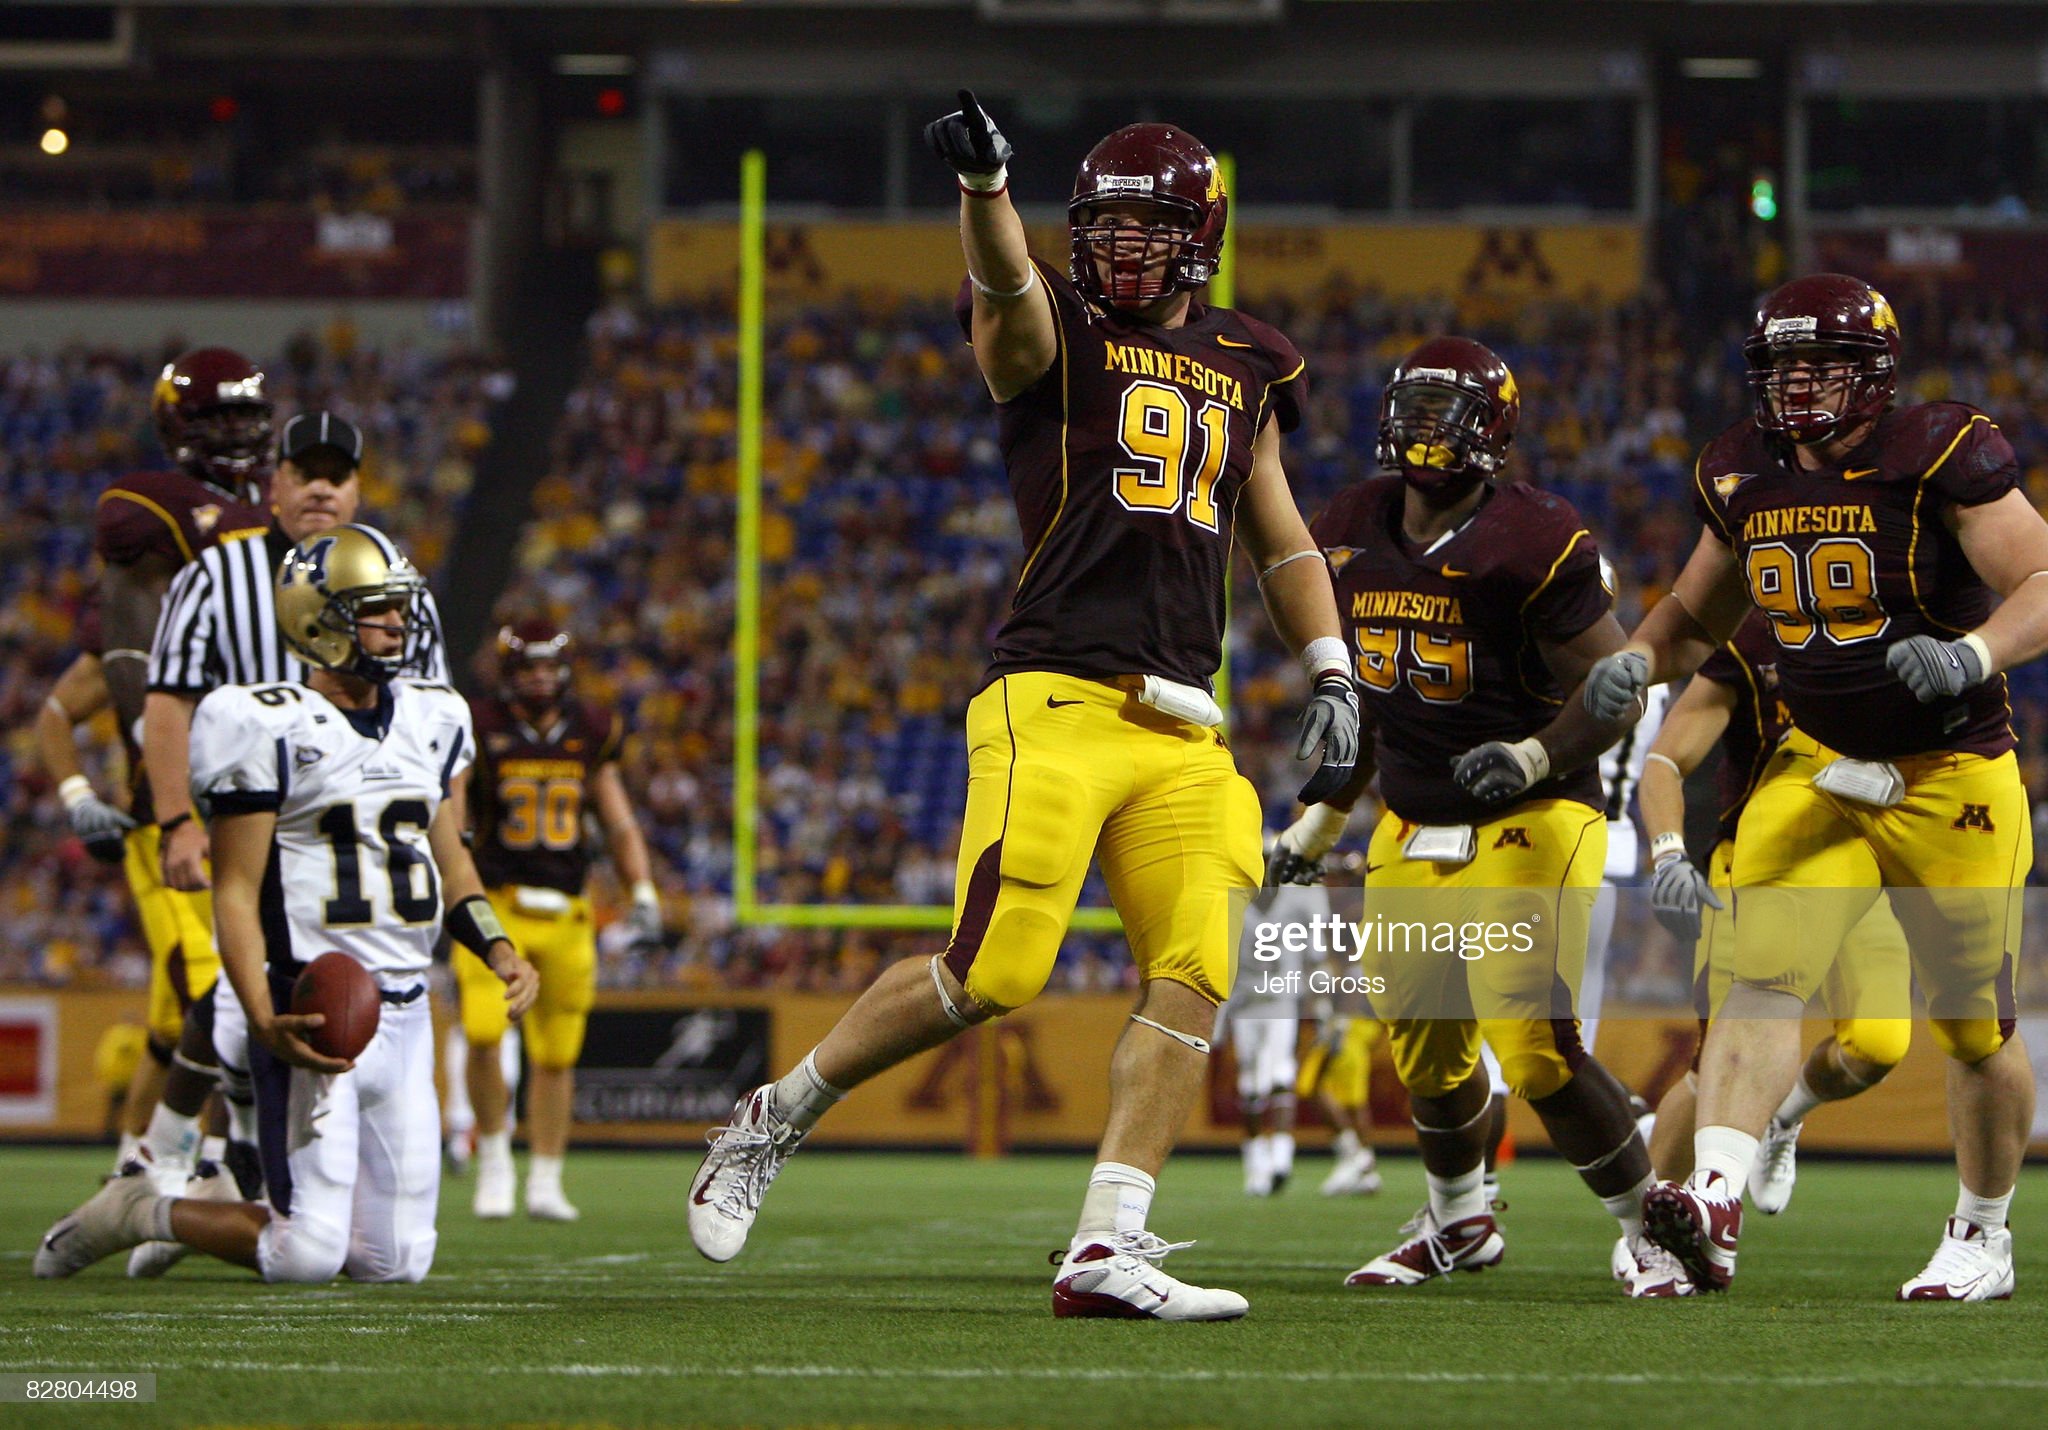 willie-vandesteeg-of-the-minnesota-golden-gophers-celebrates-after-picture-id82804498